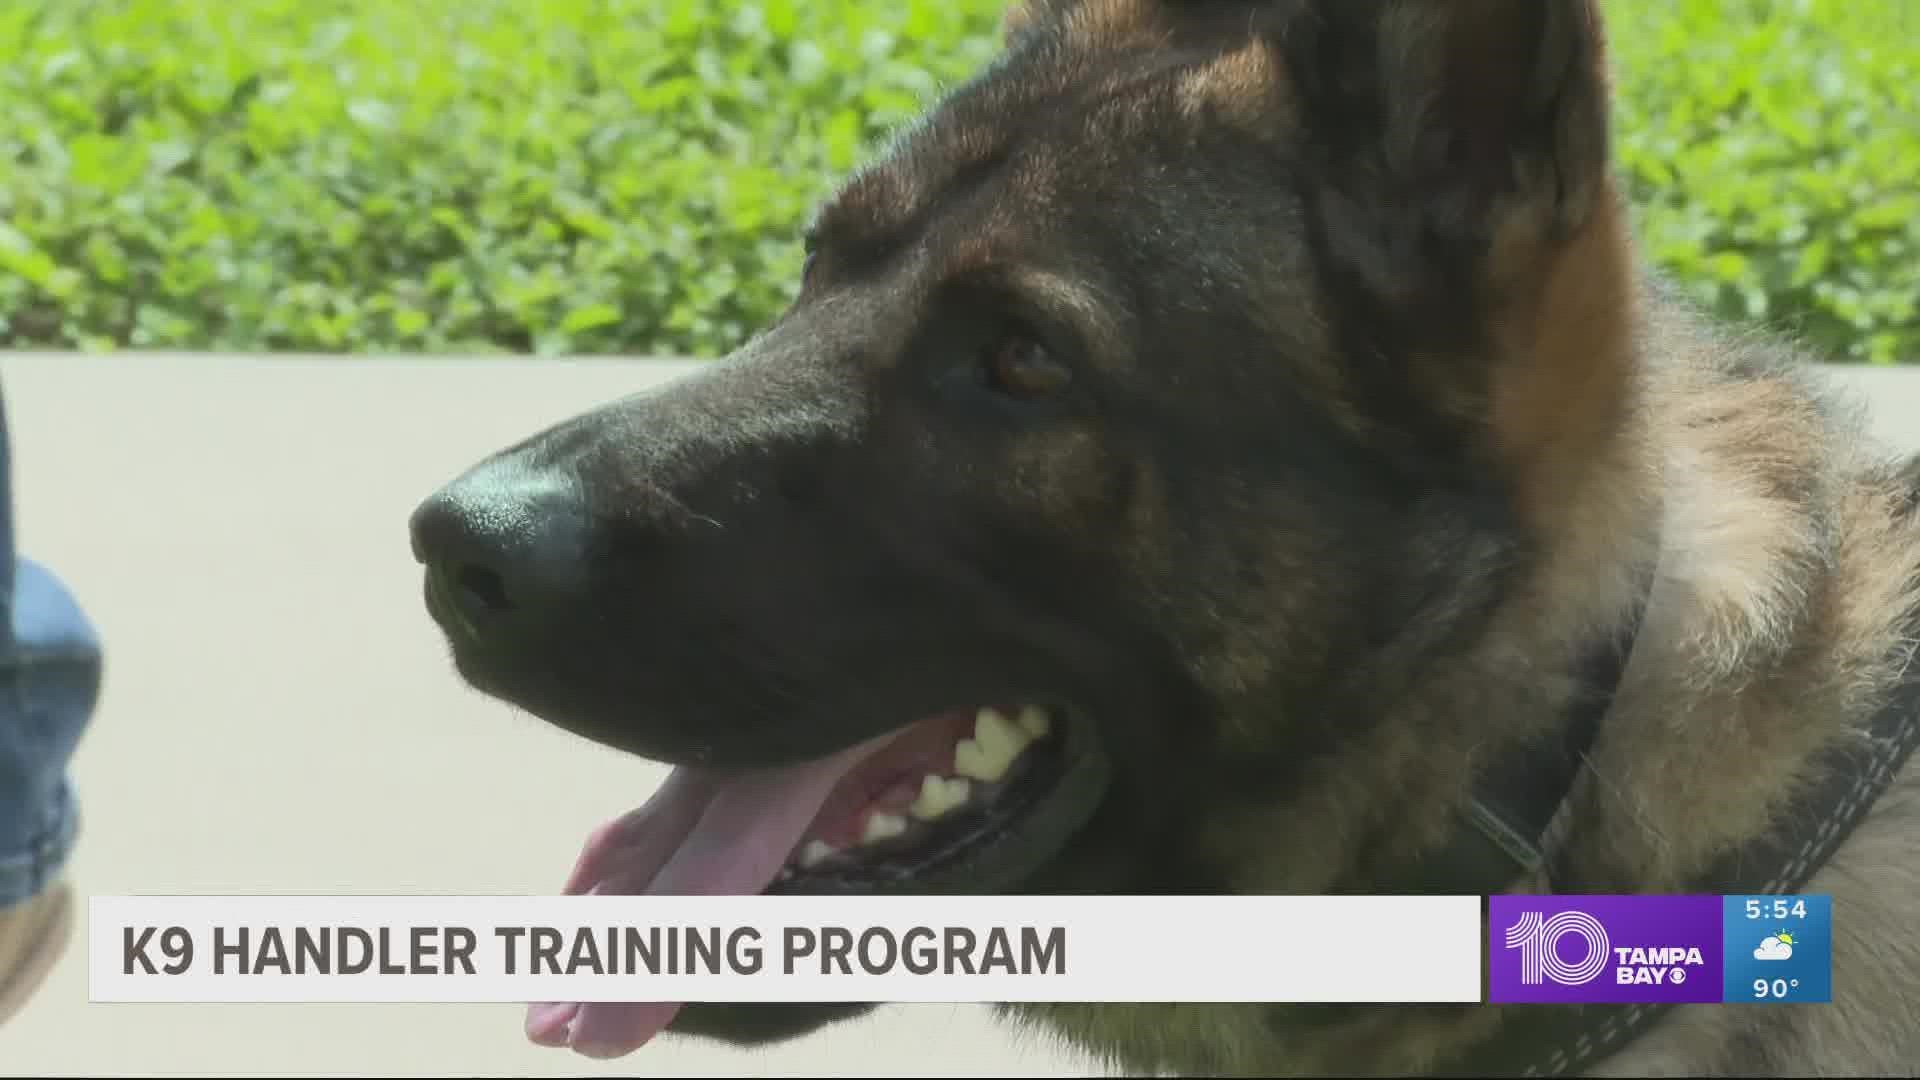 K-9s play an important role in law enforcement as do the people behind the scenes who handle and train them.